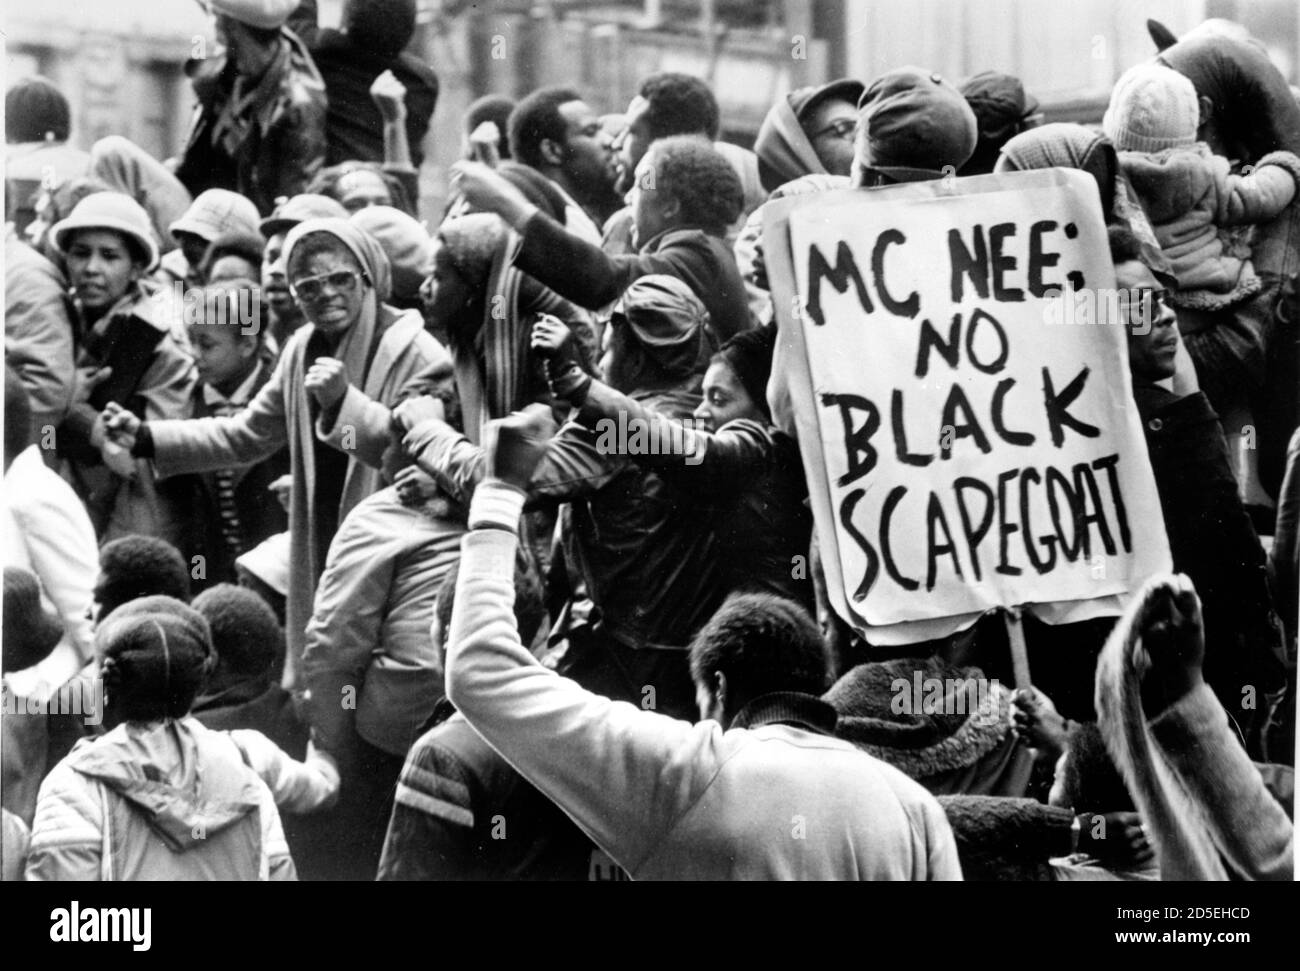 On Black People's Day of Action in 1981, thousands of people marched to Downing Street, peacefully in demonstration to protest against the Metropolitan Police's handling of the investigation of the New Cross Fire in which 13 black people people died. McNee is the then Met Police Commissioner, David McNee, who presided over some of the worst racial tension between the black community and the police. Stock Photo